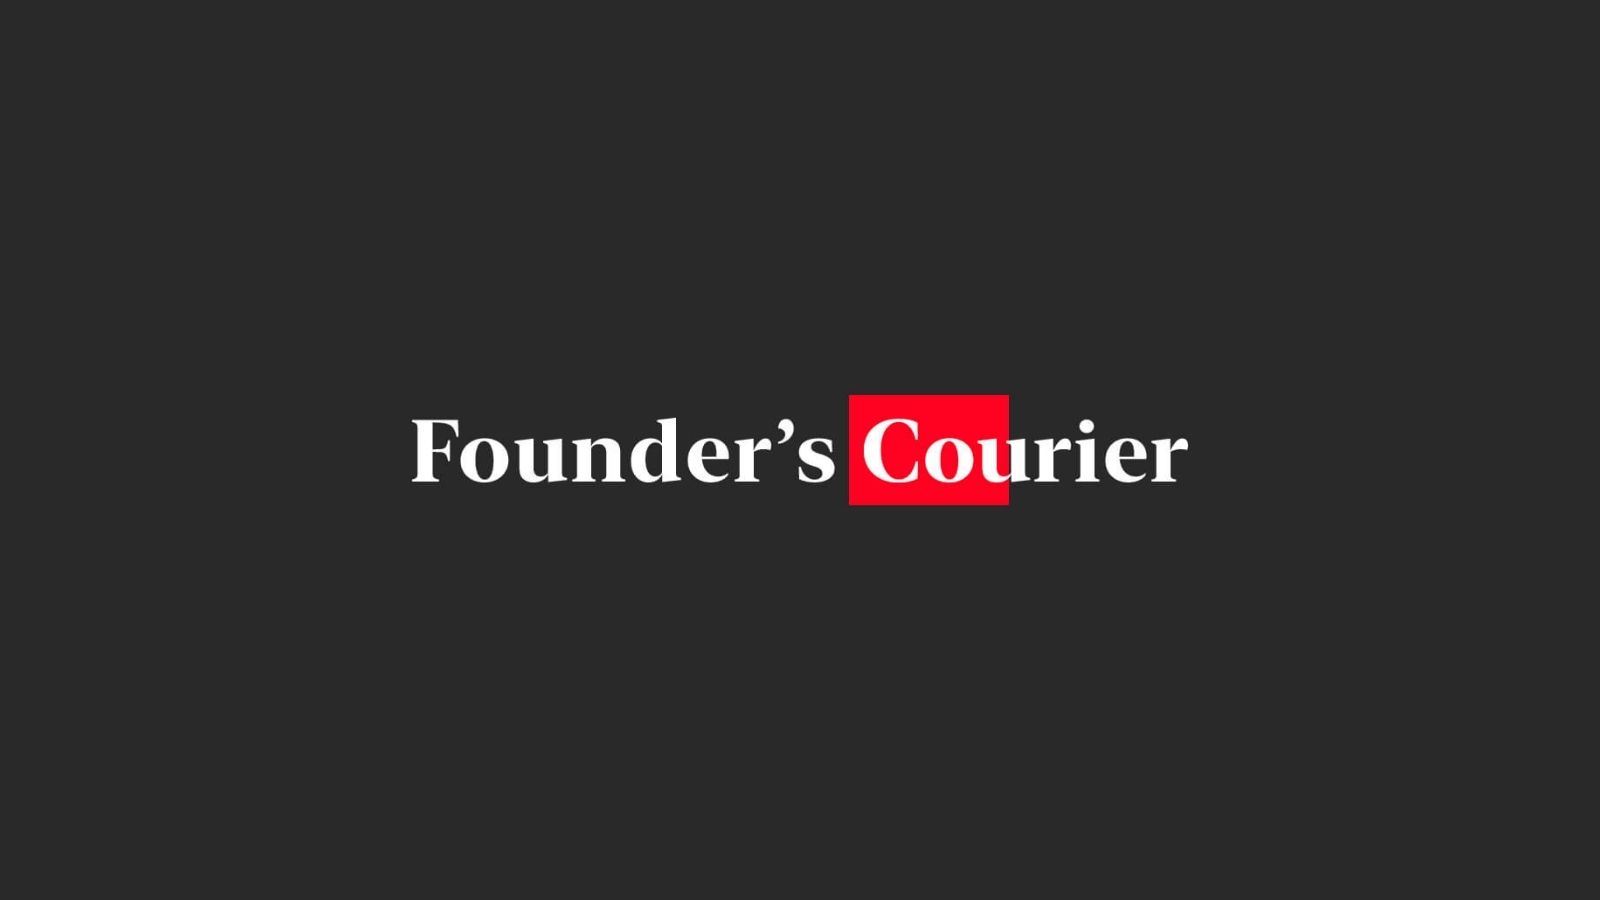 Founder's Courier Aspires to be the Leading Source of Information on Successful Business Leaders & Investors